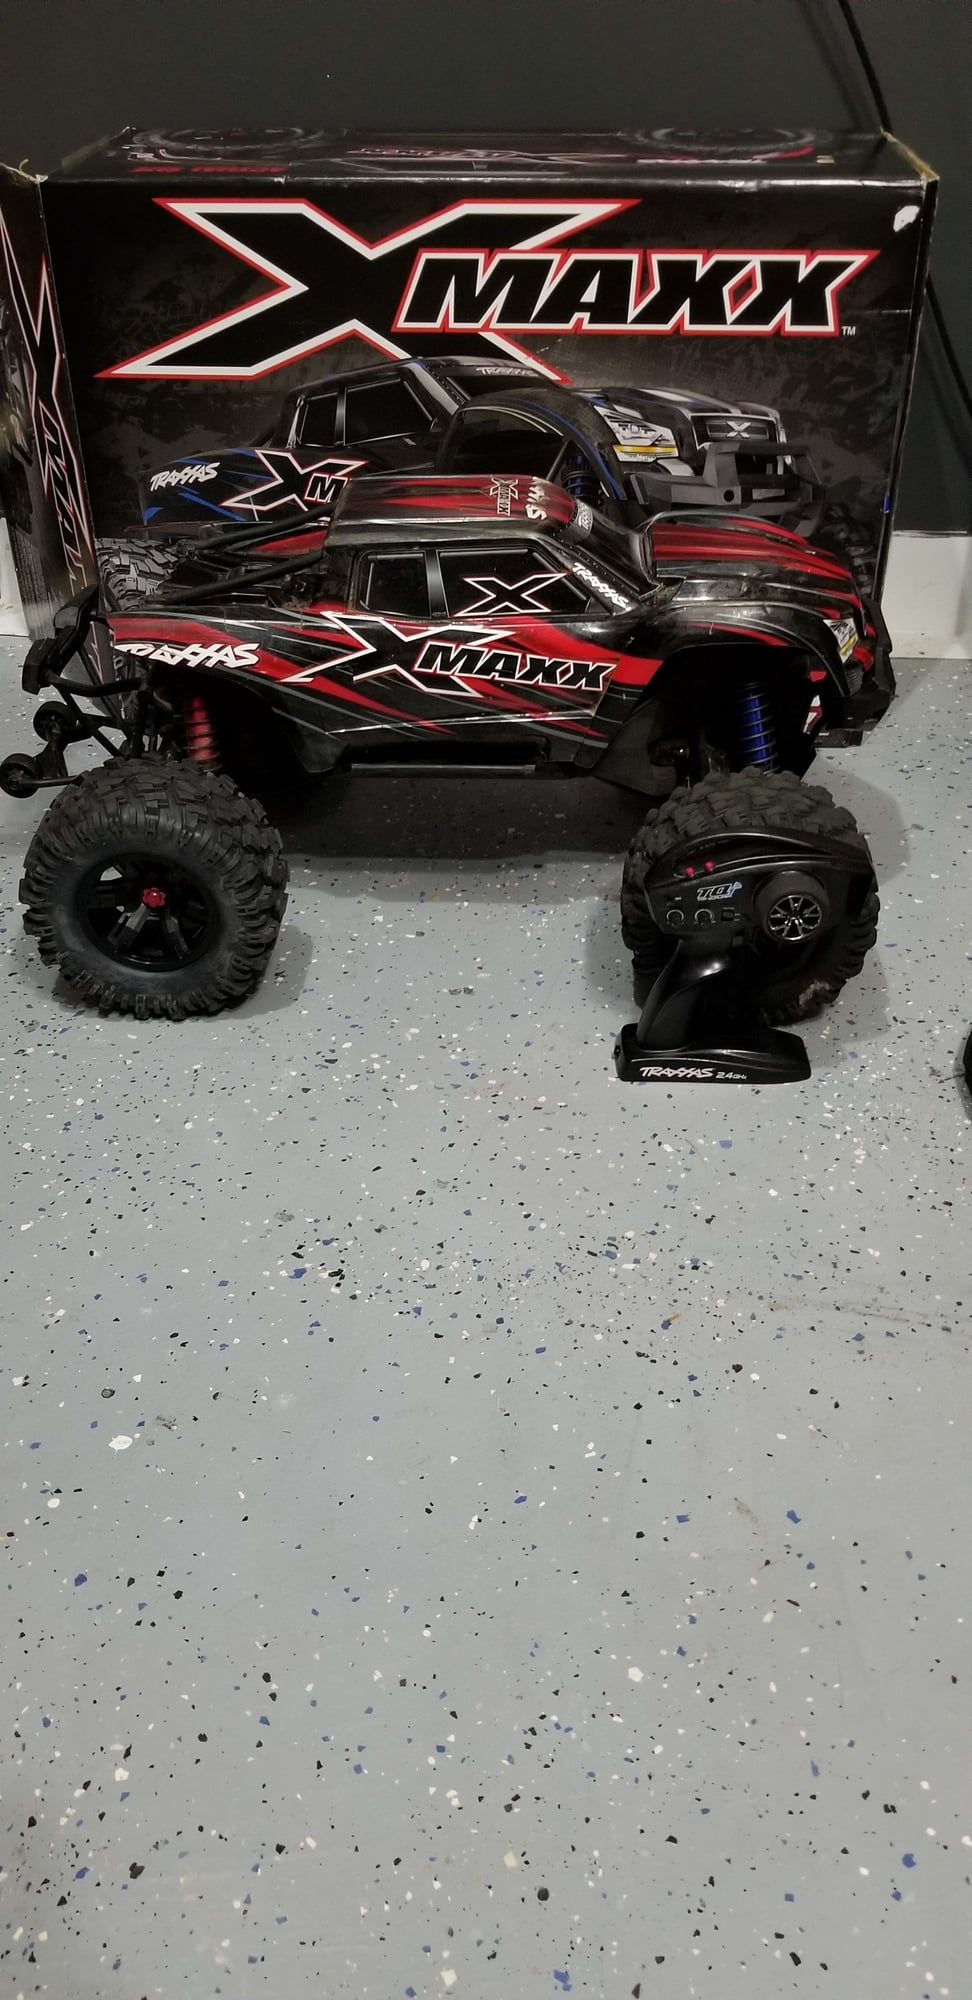 Xmaxx 8s rtr with your batteries - R/C Tech Forums